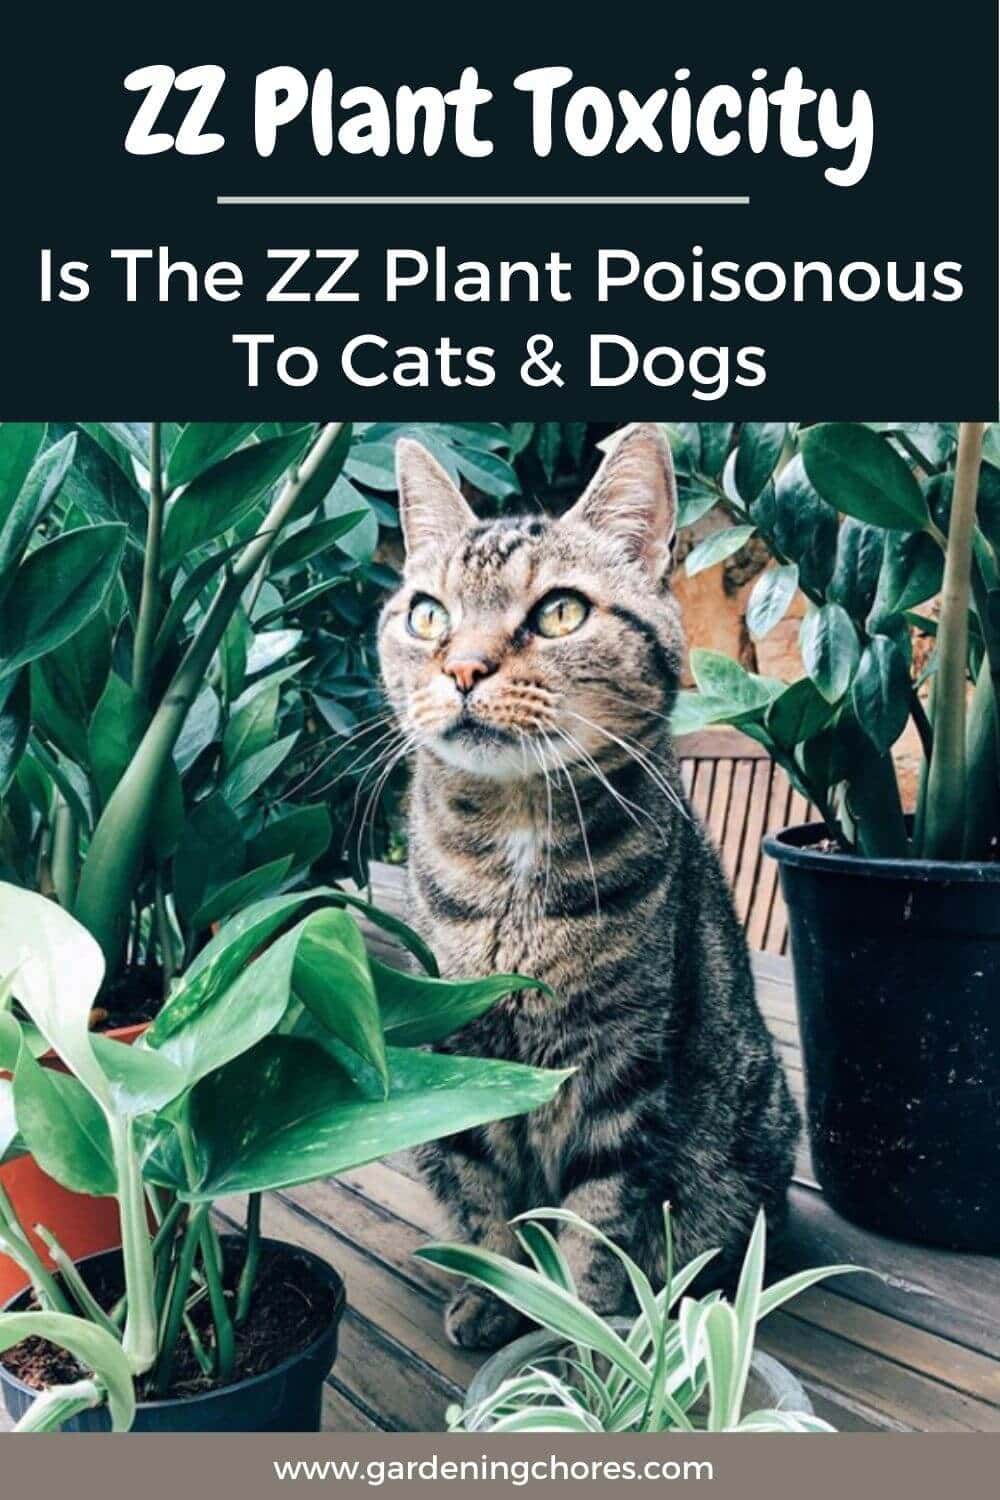 ZZ Plant Toxicity Is The ZZ Plant Poisonous To Cats, Dogs Or Children?